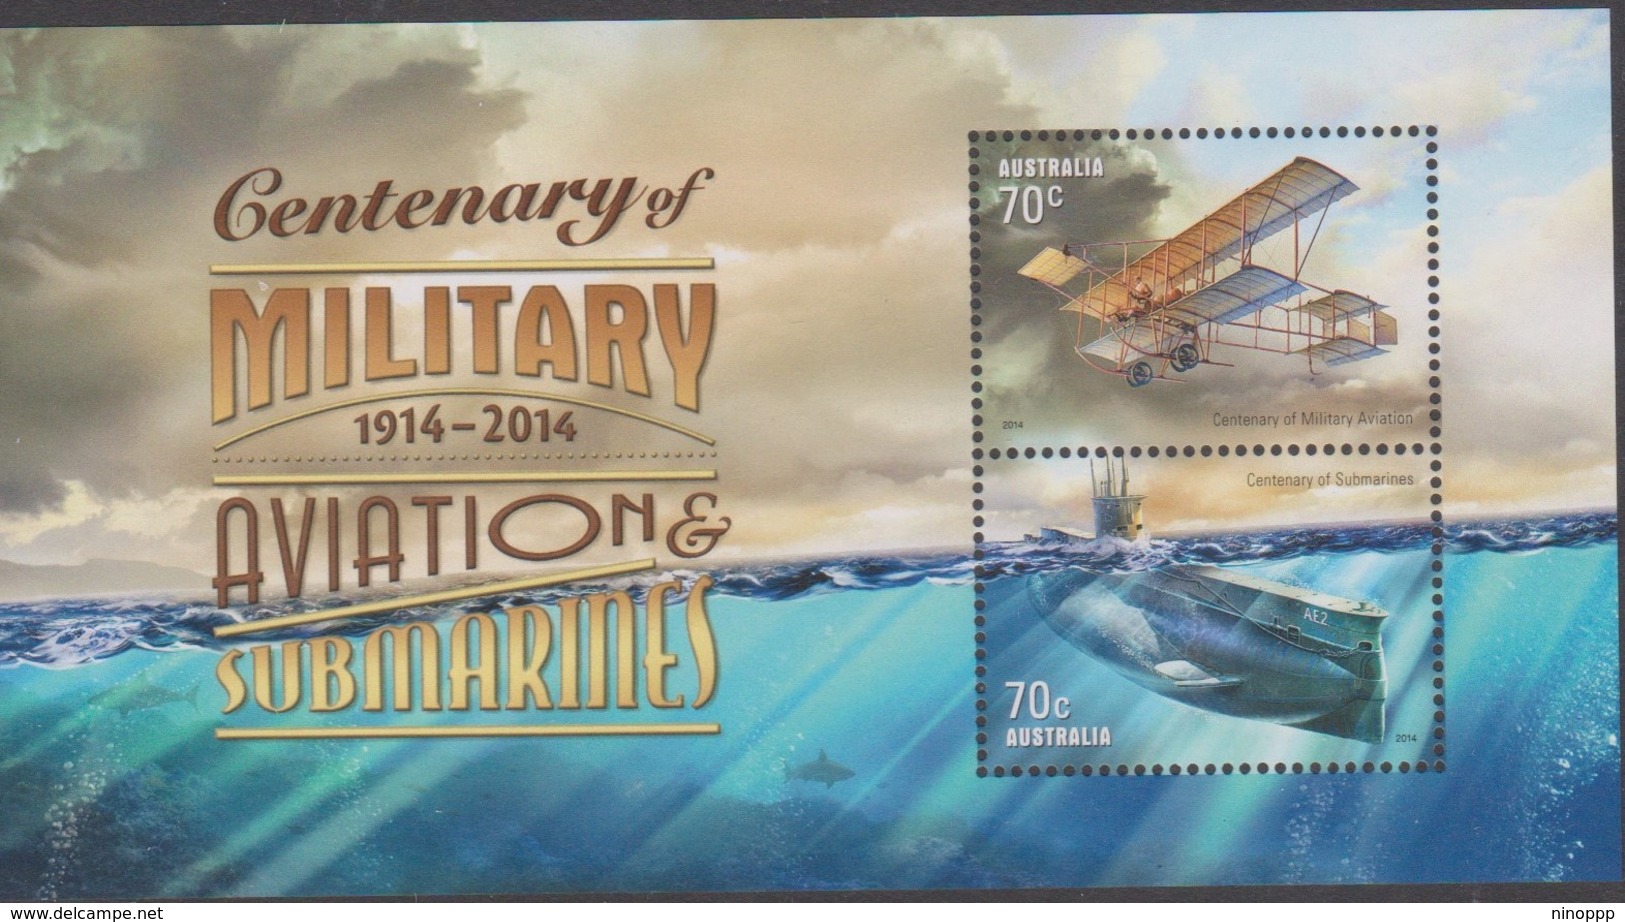 Australia ASC 3221MS 2014 Military Aviation And Submarine Miniature Sheet,mint Never Hinged - Mint Stamps